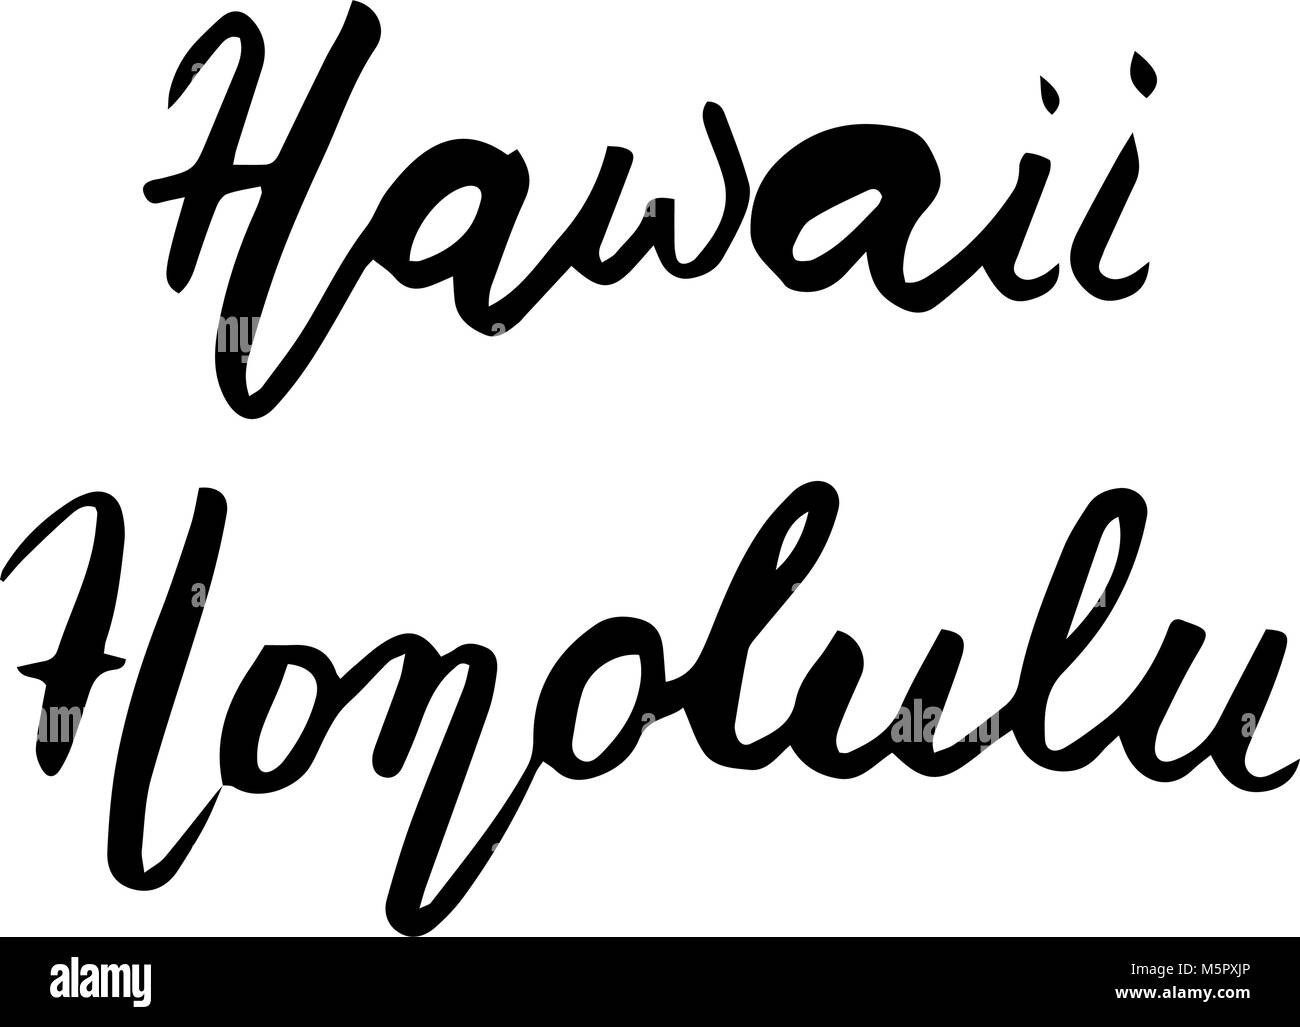 State USA Hawaii and capital Honolulu hand lettering element isolated on white background. Calligraphic element for your design. Stock Vector